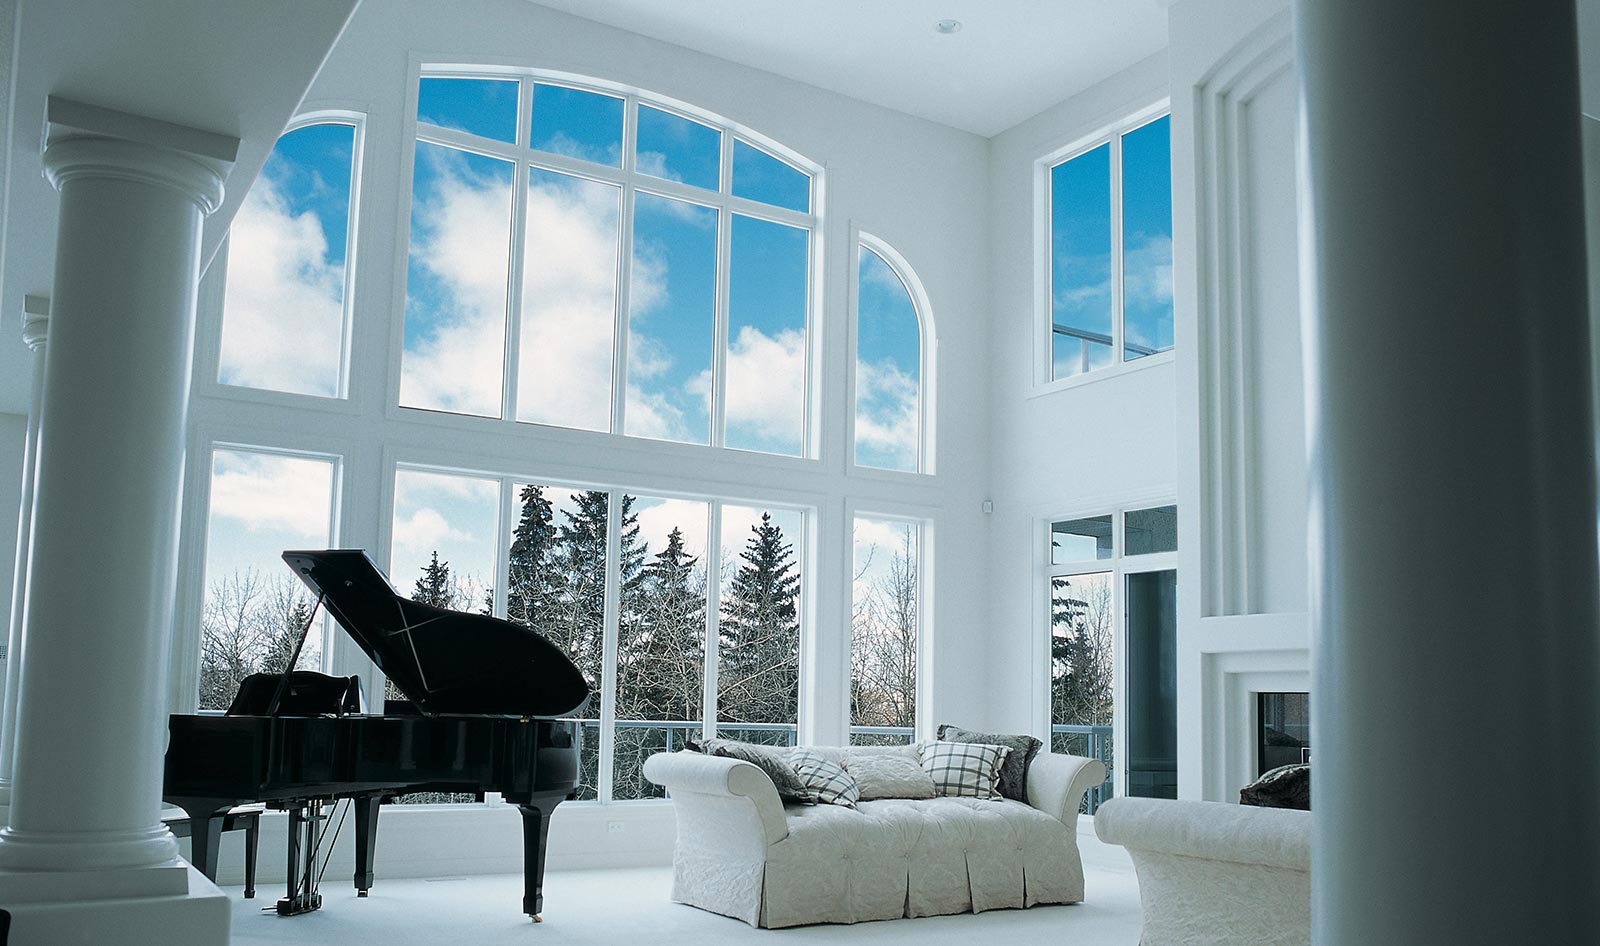 Grand and luxurious casement windows in a collection from Turkstra Lumber